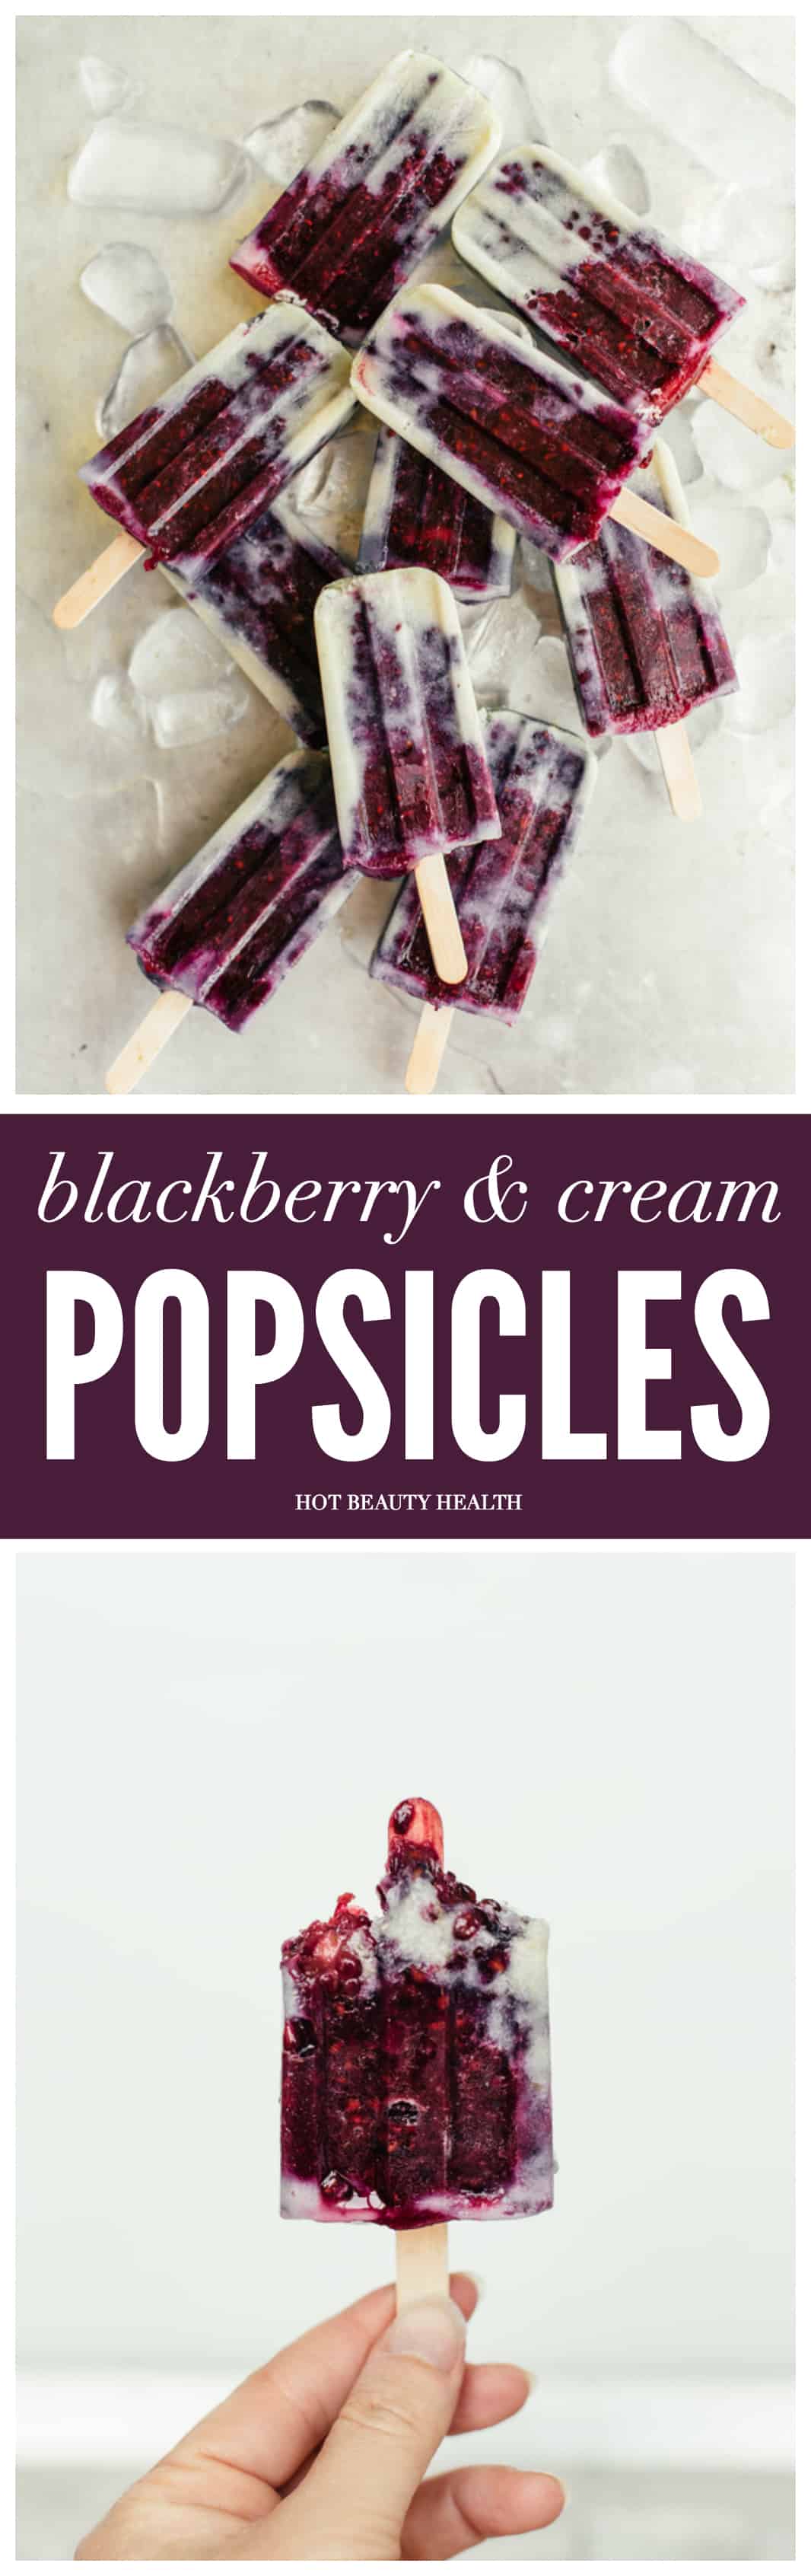 Cool down with this tasty and creamy popsicle recipe made with blackberries and cashew milk. Perfect to enjoy at spring picnics, as dessert at summer bbqs and when lounging by the pool. (Click to see for recipe!)